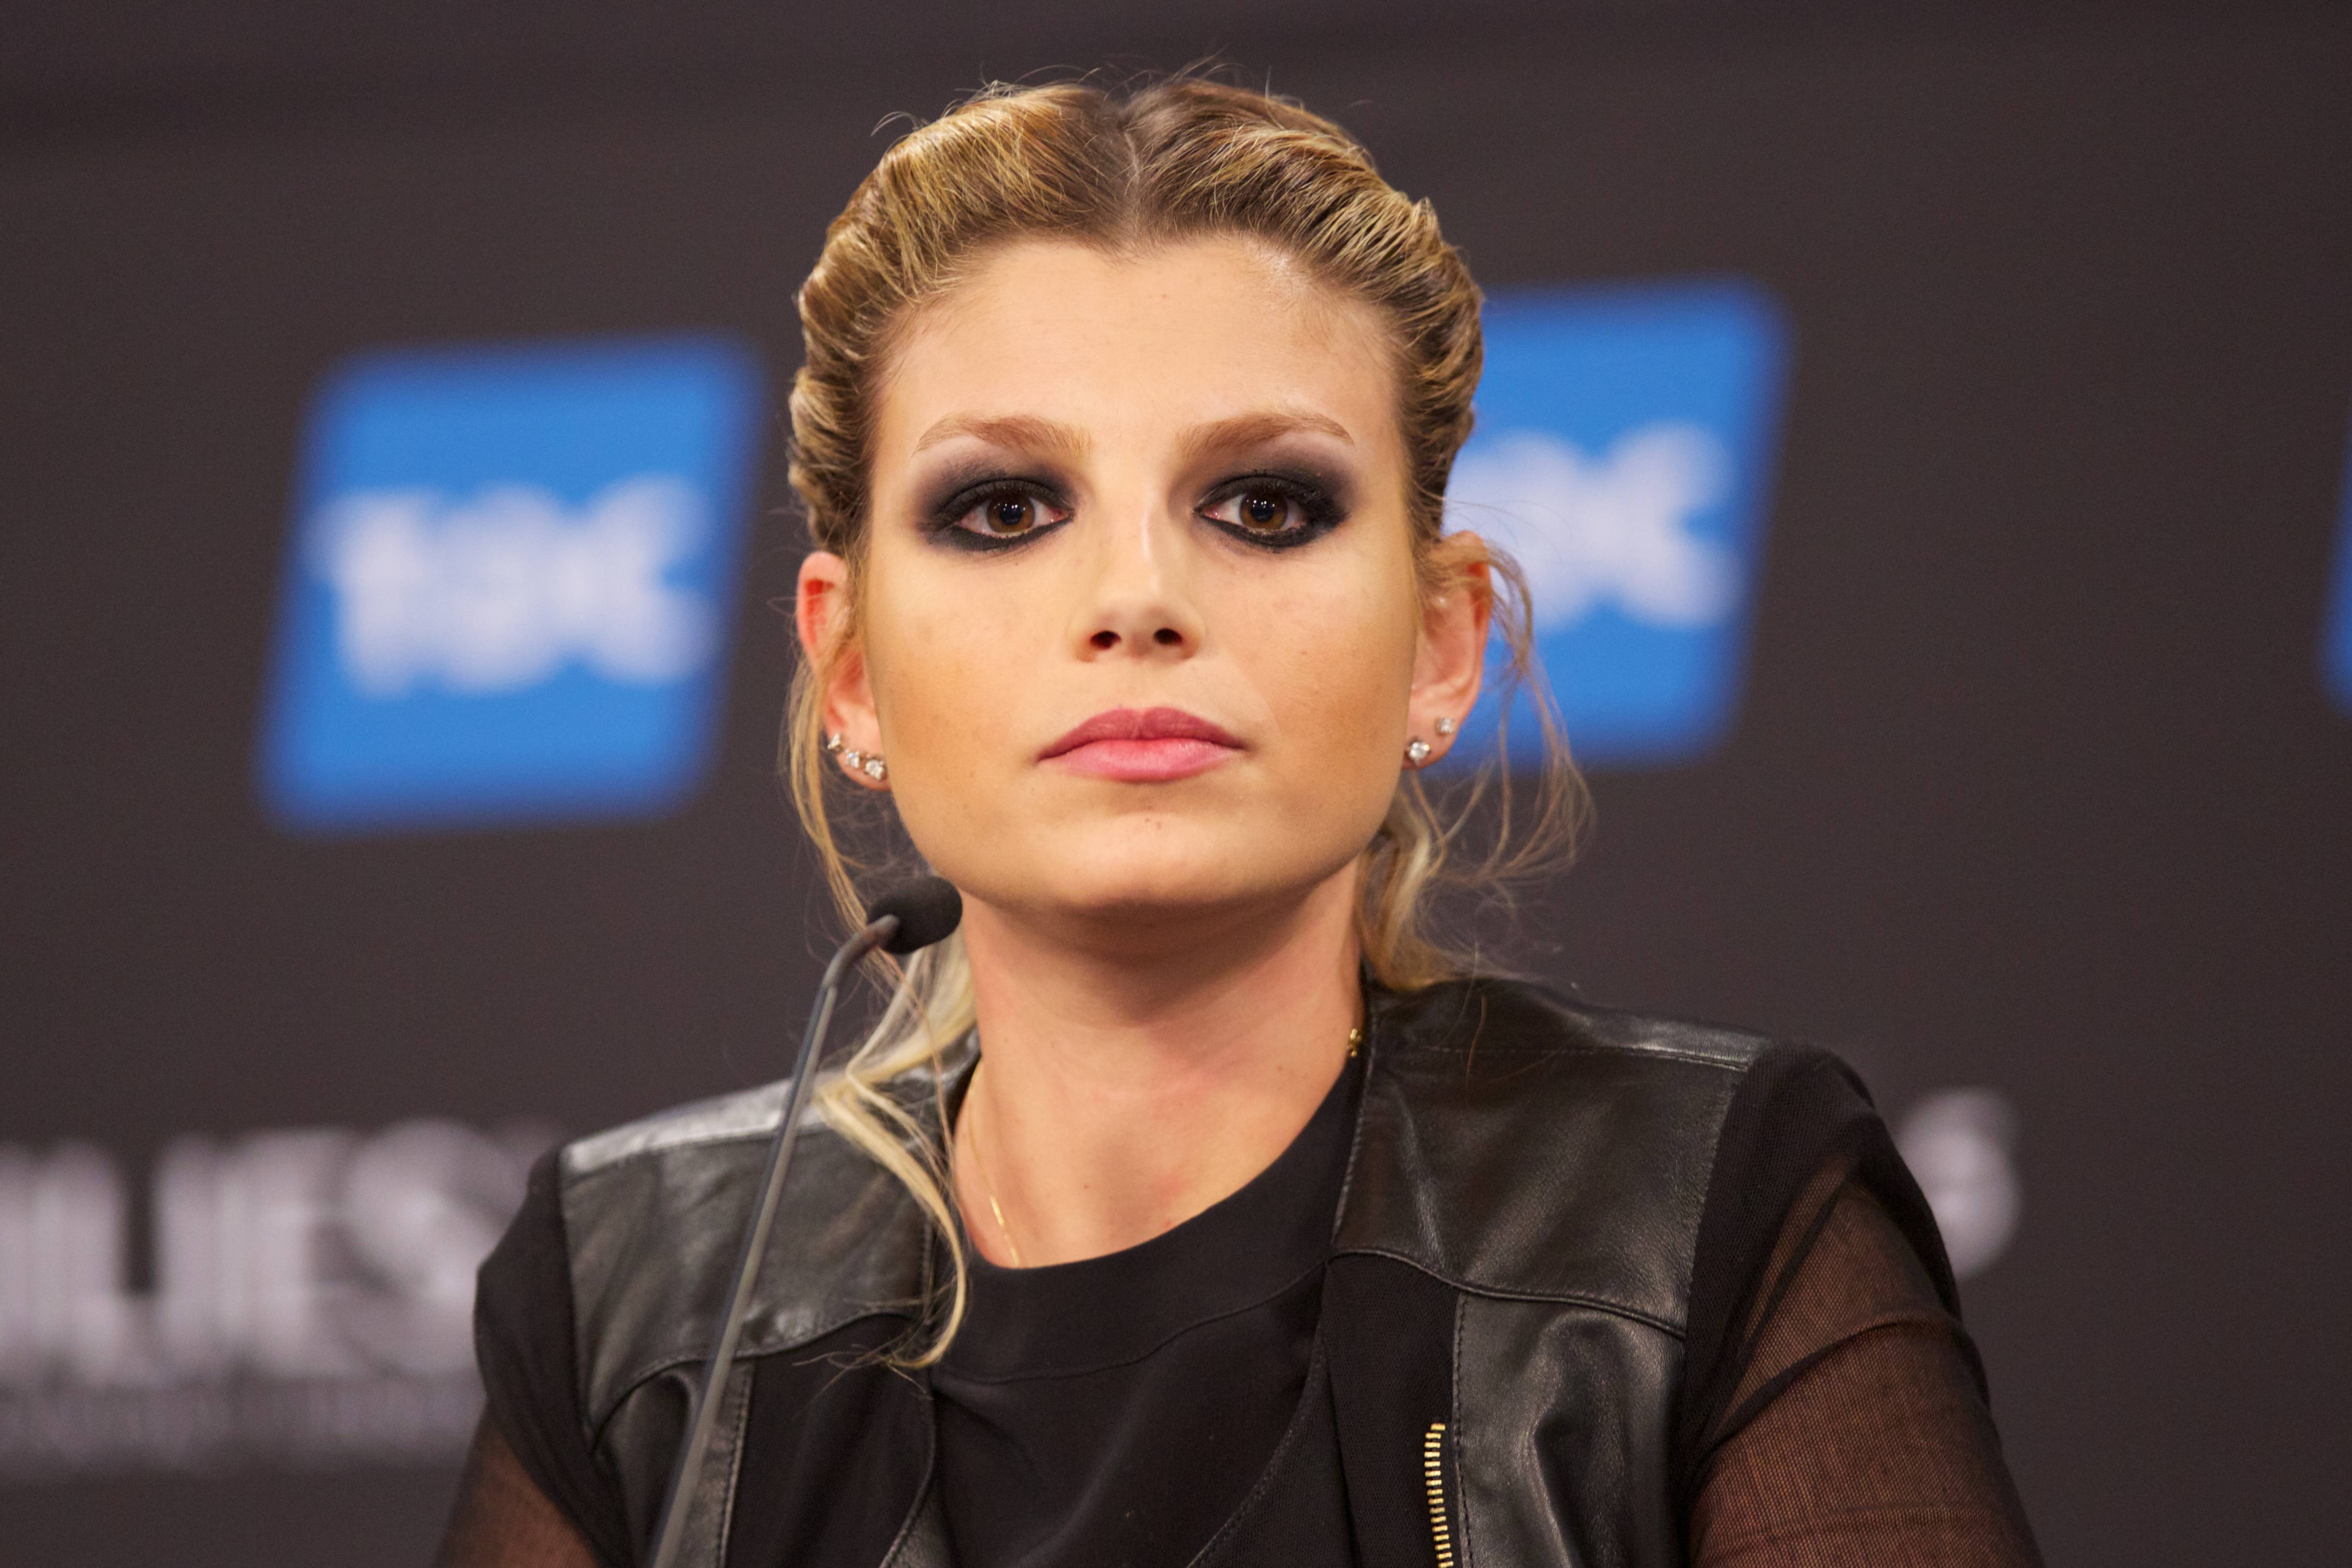 COPENHAGEN, DENMARK - MAY 09: Emma Marrone of Italy attends a press conference ahead of the Grand Final of the Eurovision Song Contest 2014 on May 9, 2014 in Copenhagen, Denmark. (Photo by Ragnar Singsaas/Getty Images)